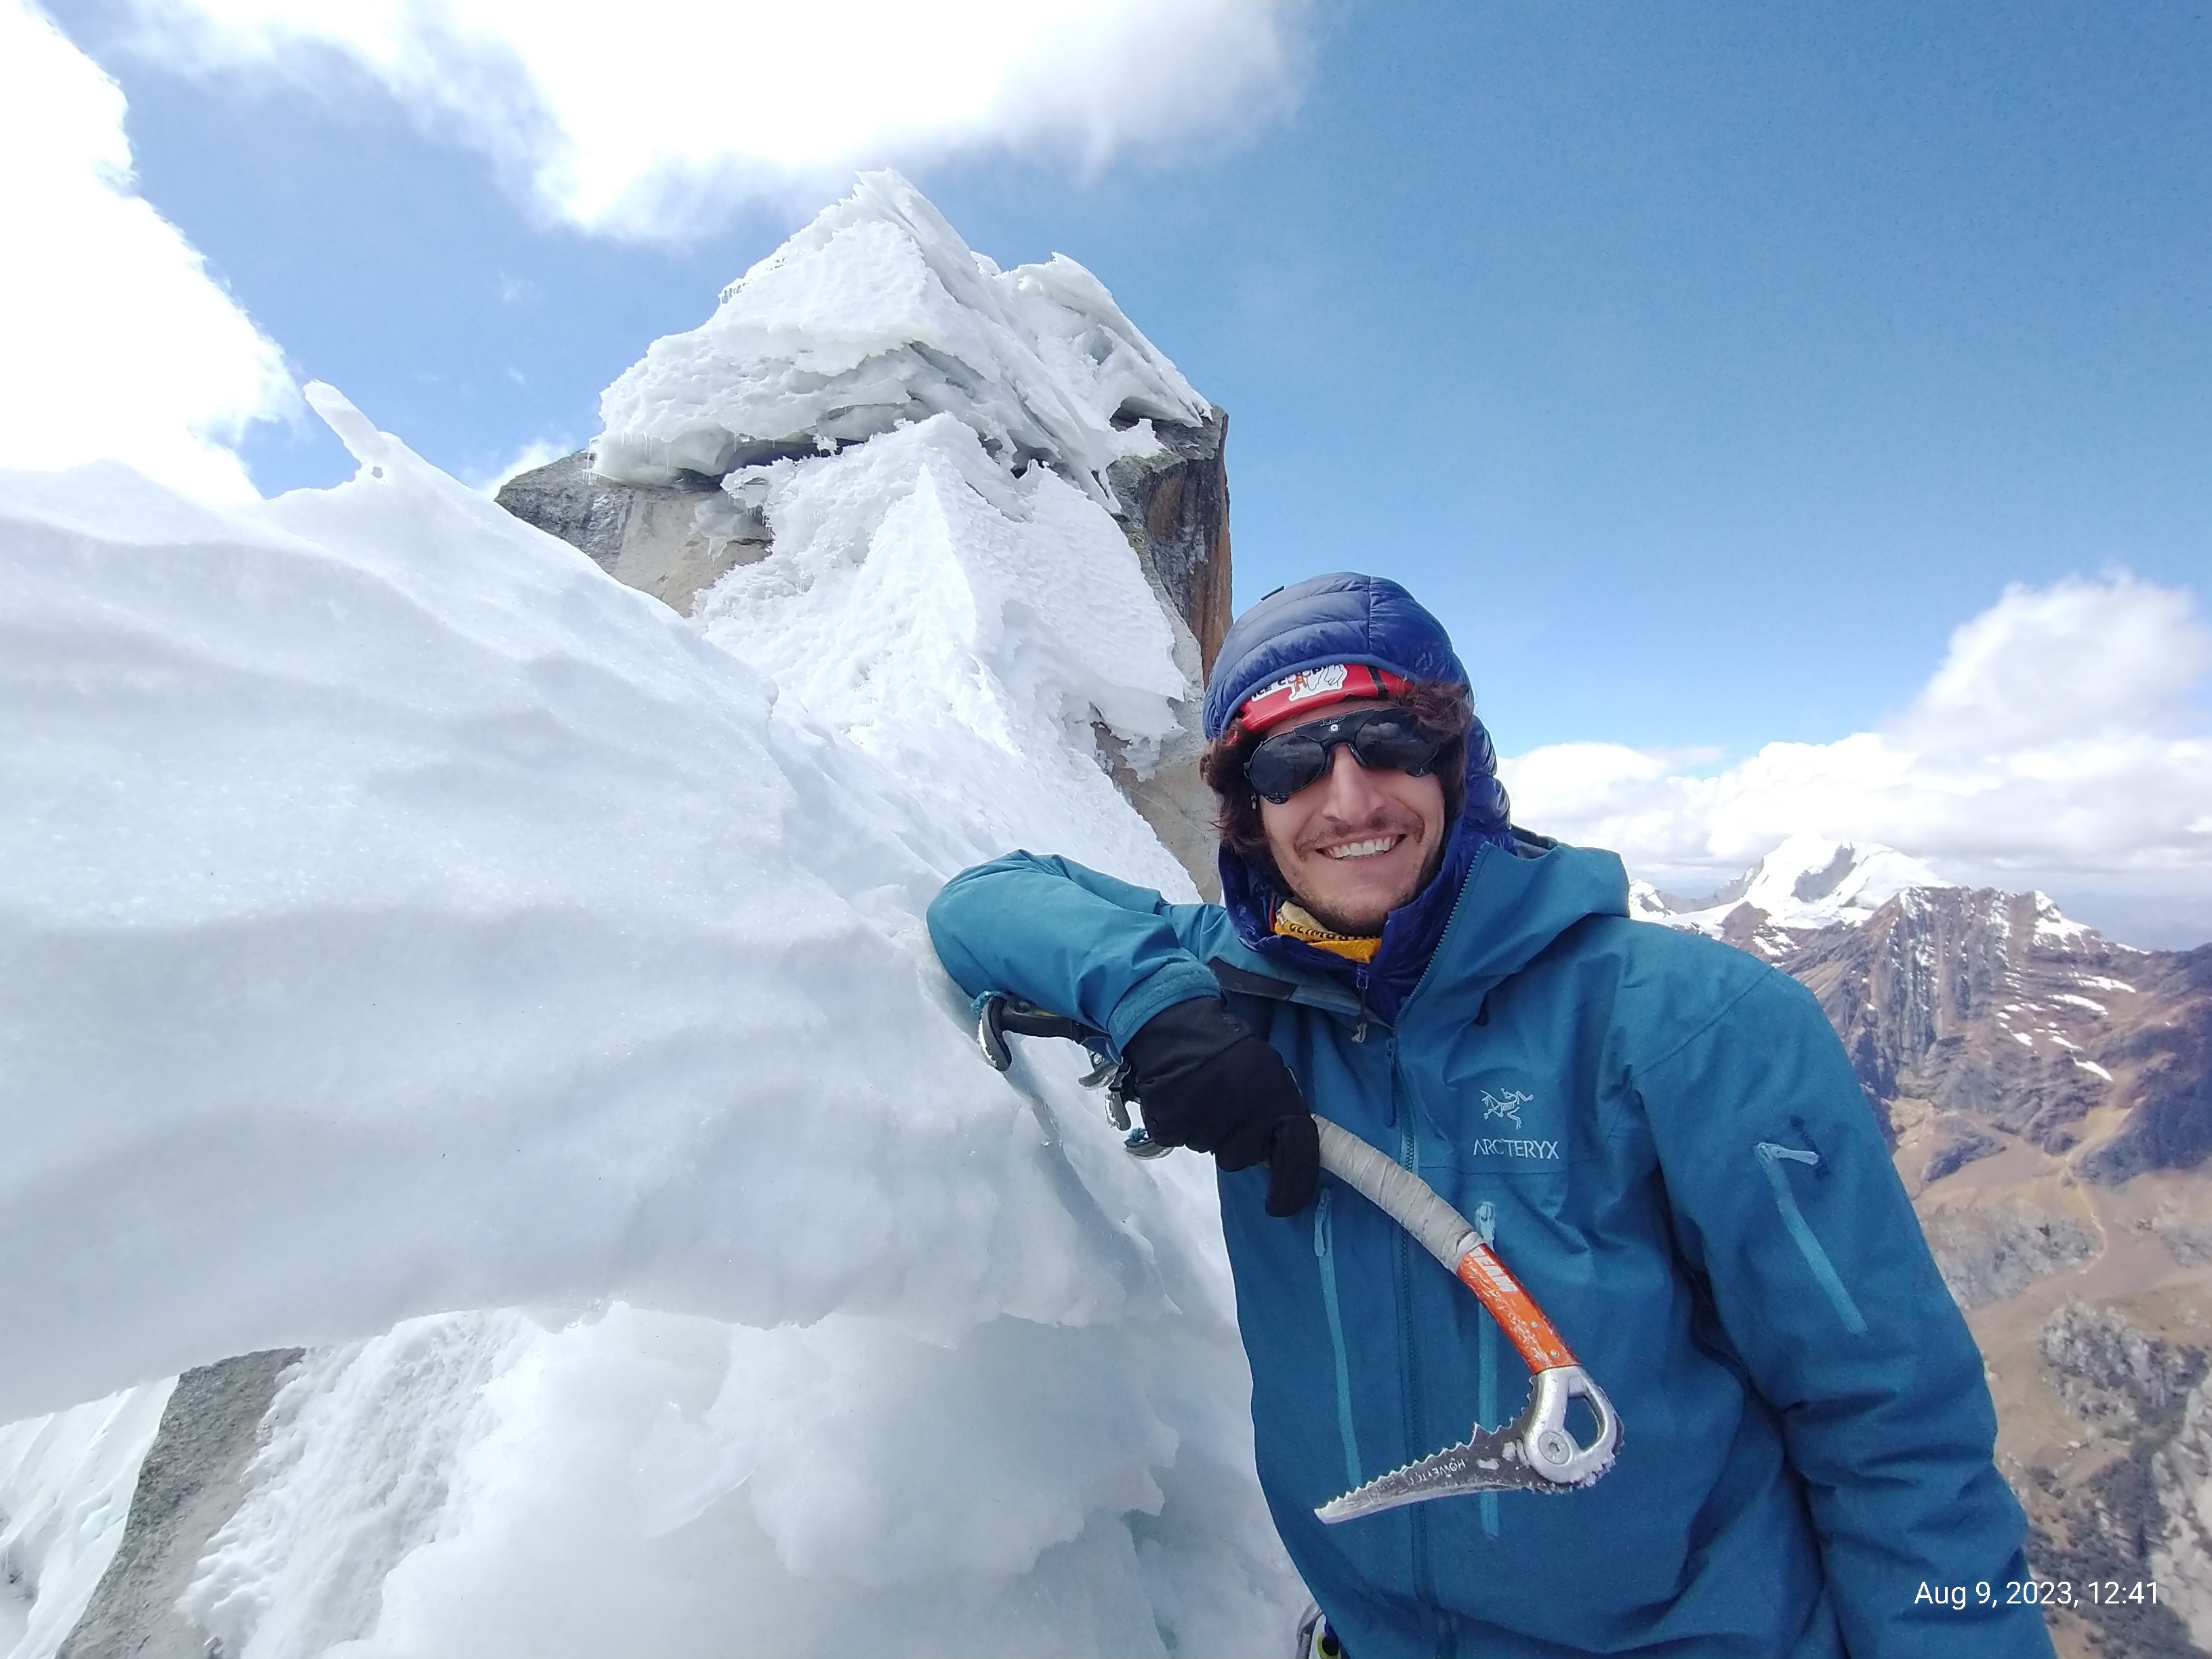 Dan Kay, a male climber, atop a mountain peak in Peru. He rests his right arm on a rib of snow, and holds an aggressive ice tool in his hand. He wears a hardshell jacket, glacier glasses, and a helmet. He is smiling big, on the summit. Blue skies are behind. 